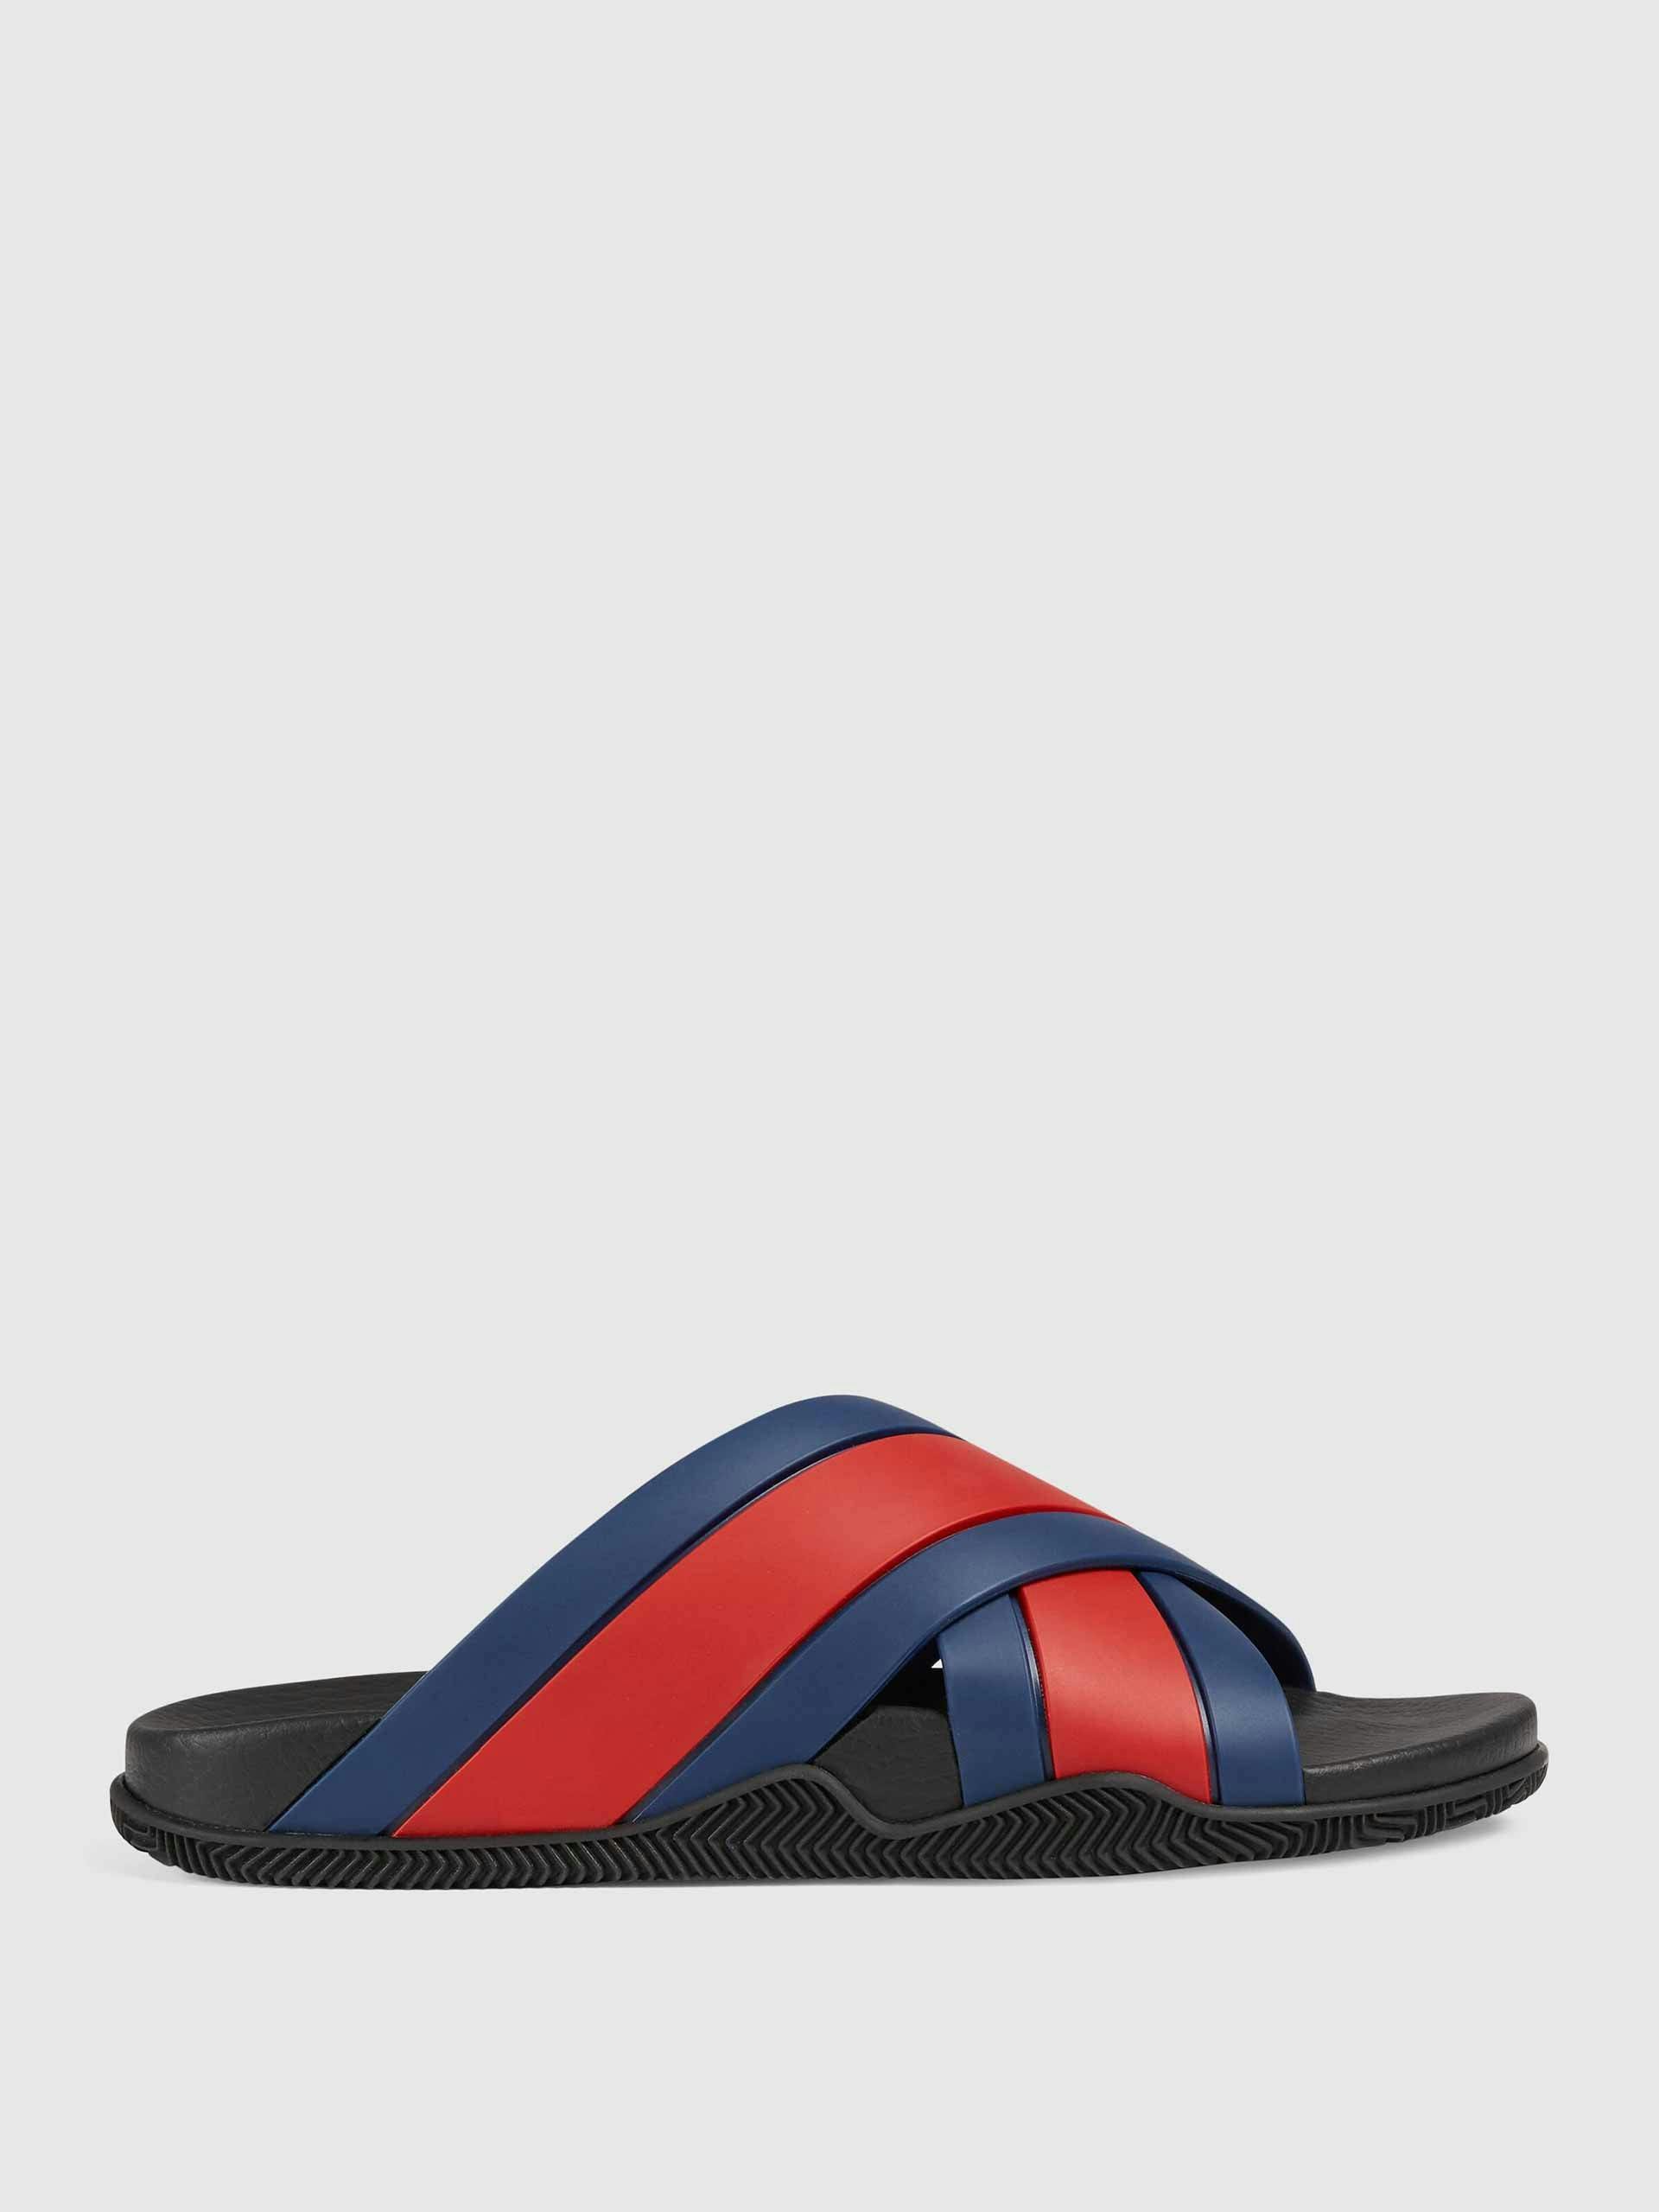 Red and blue slides